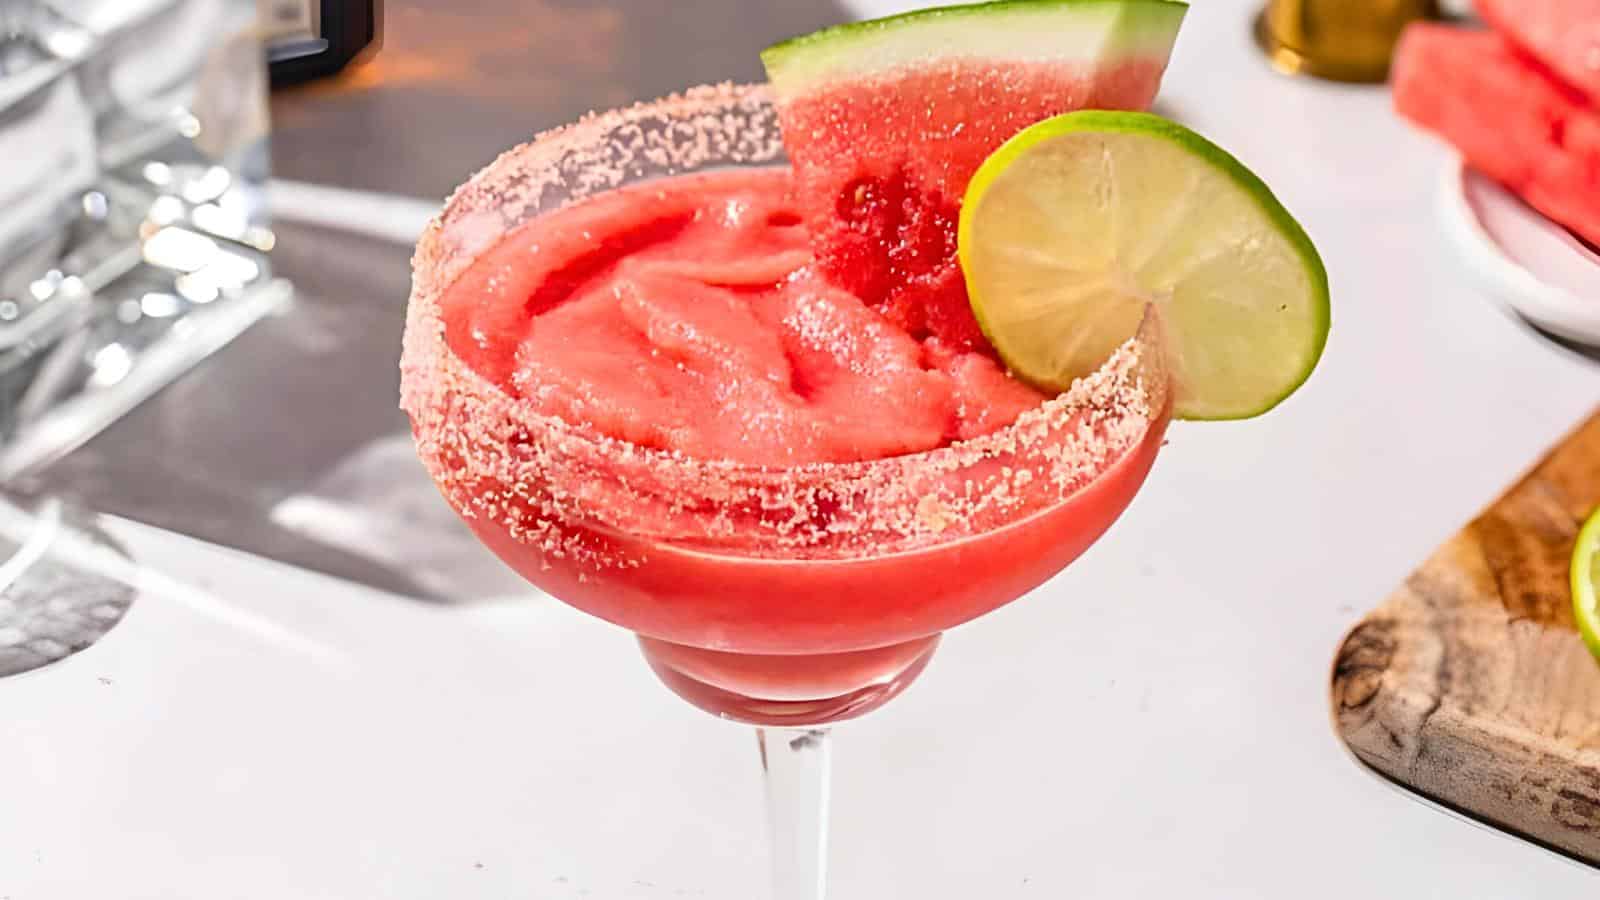 <p>Cool down with a Frozen Watermelon Margarita. This icy summer cocktail combines fresh watermelon with tequila and lime for a refreshing twist. Perfect for sipping on a hot day!<br><strong>Get the Recipe: </strong><a href="https://charmingcocktails.com/frozen-watermelon-margarita/?utm_source=msn&utm_medium=page&utm_campaign=msn" rel="noopener">Frozen Watermelon Margarita</a></p>